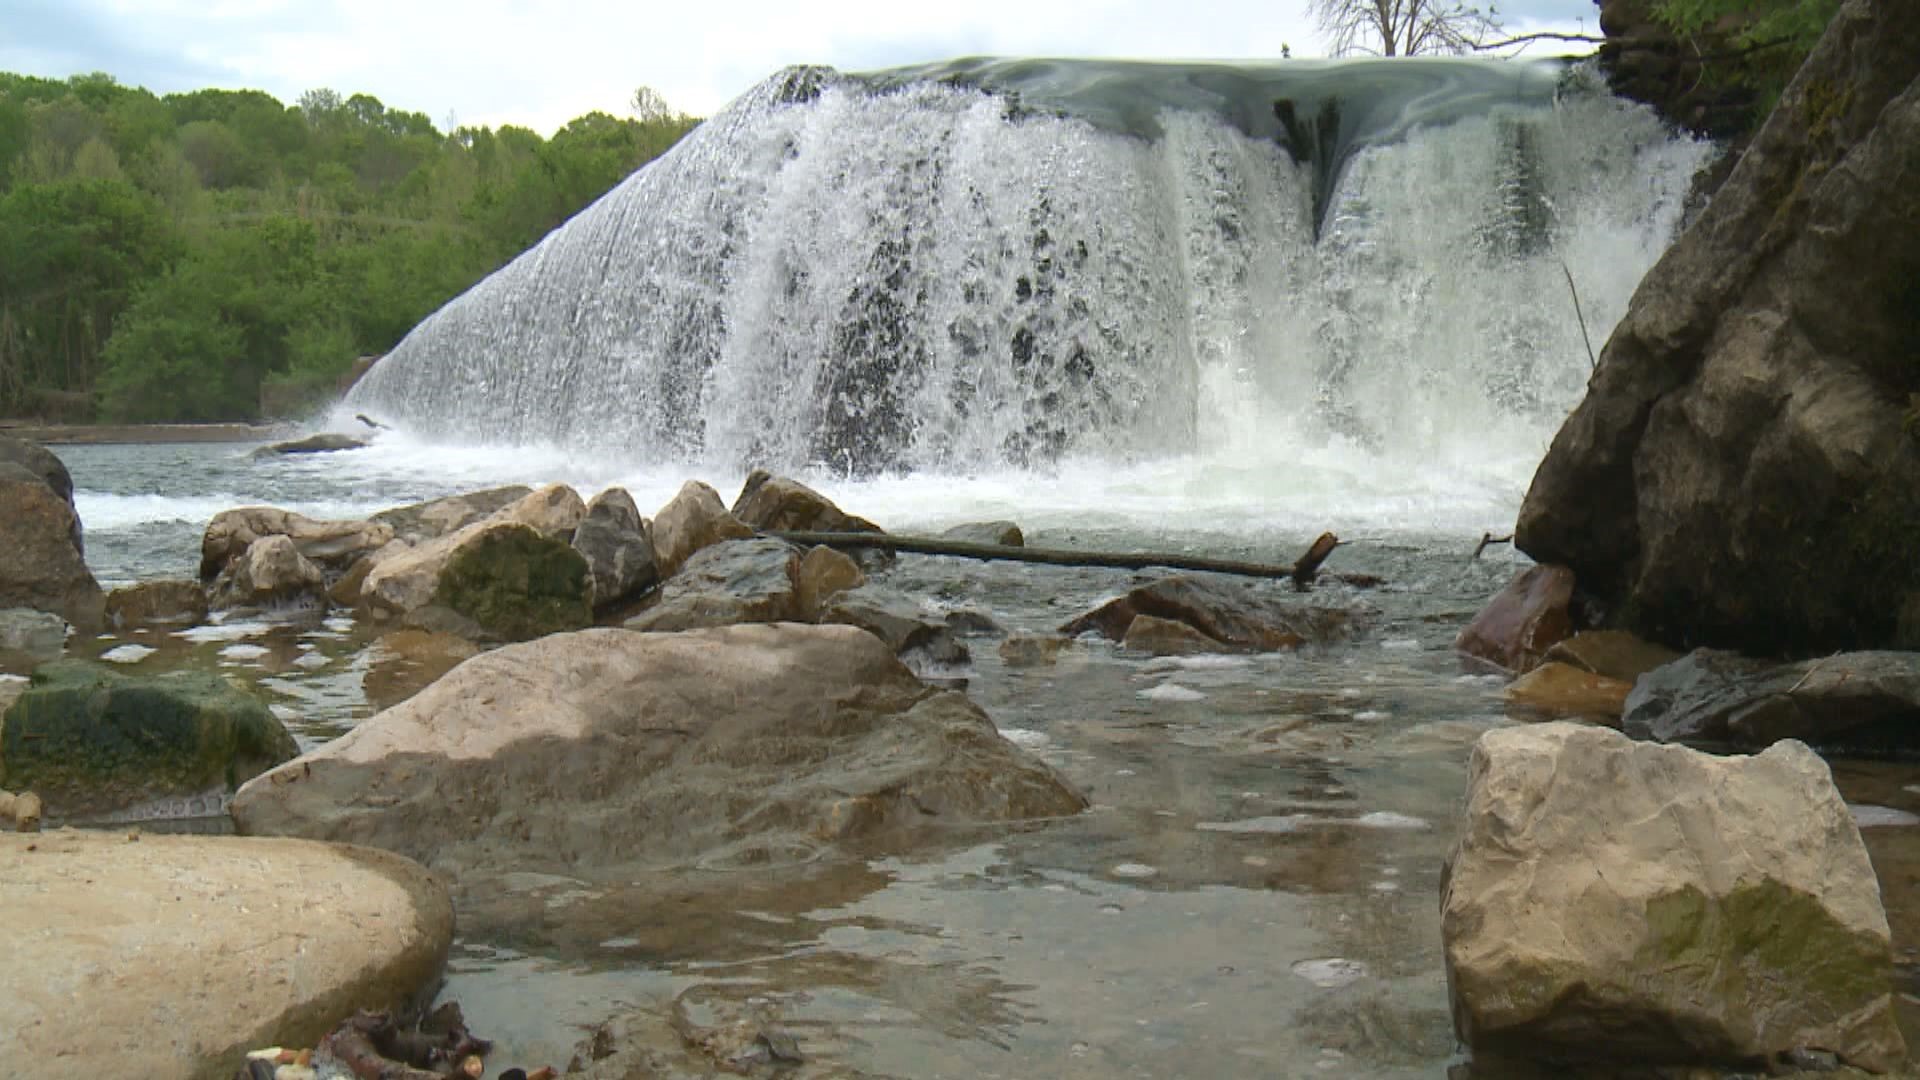 Families of drowning victims want changes to make swimming safer at a historic dam along the Little River. But who owns the dam?